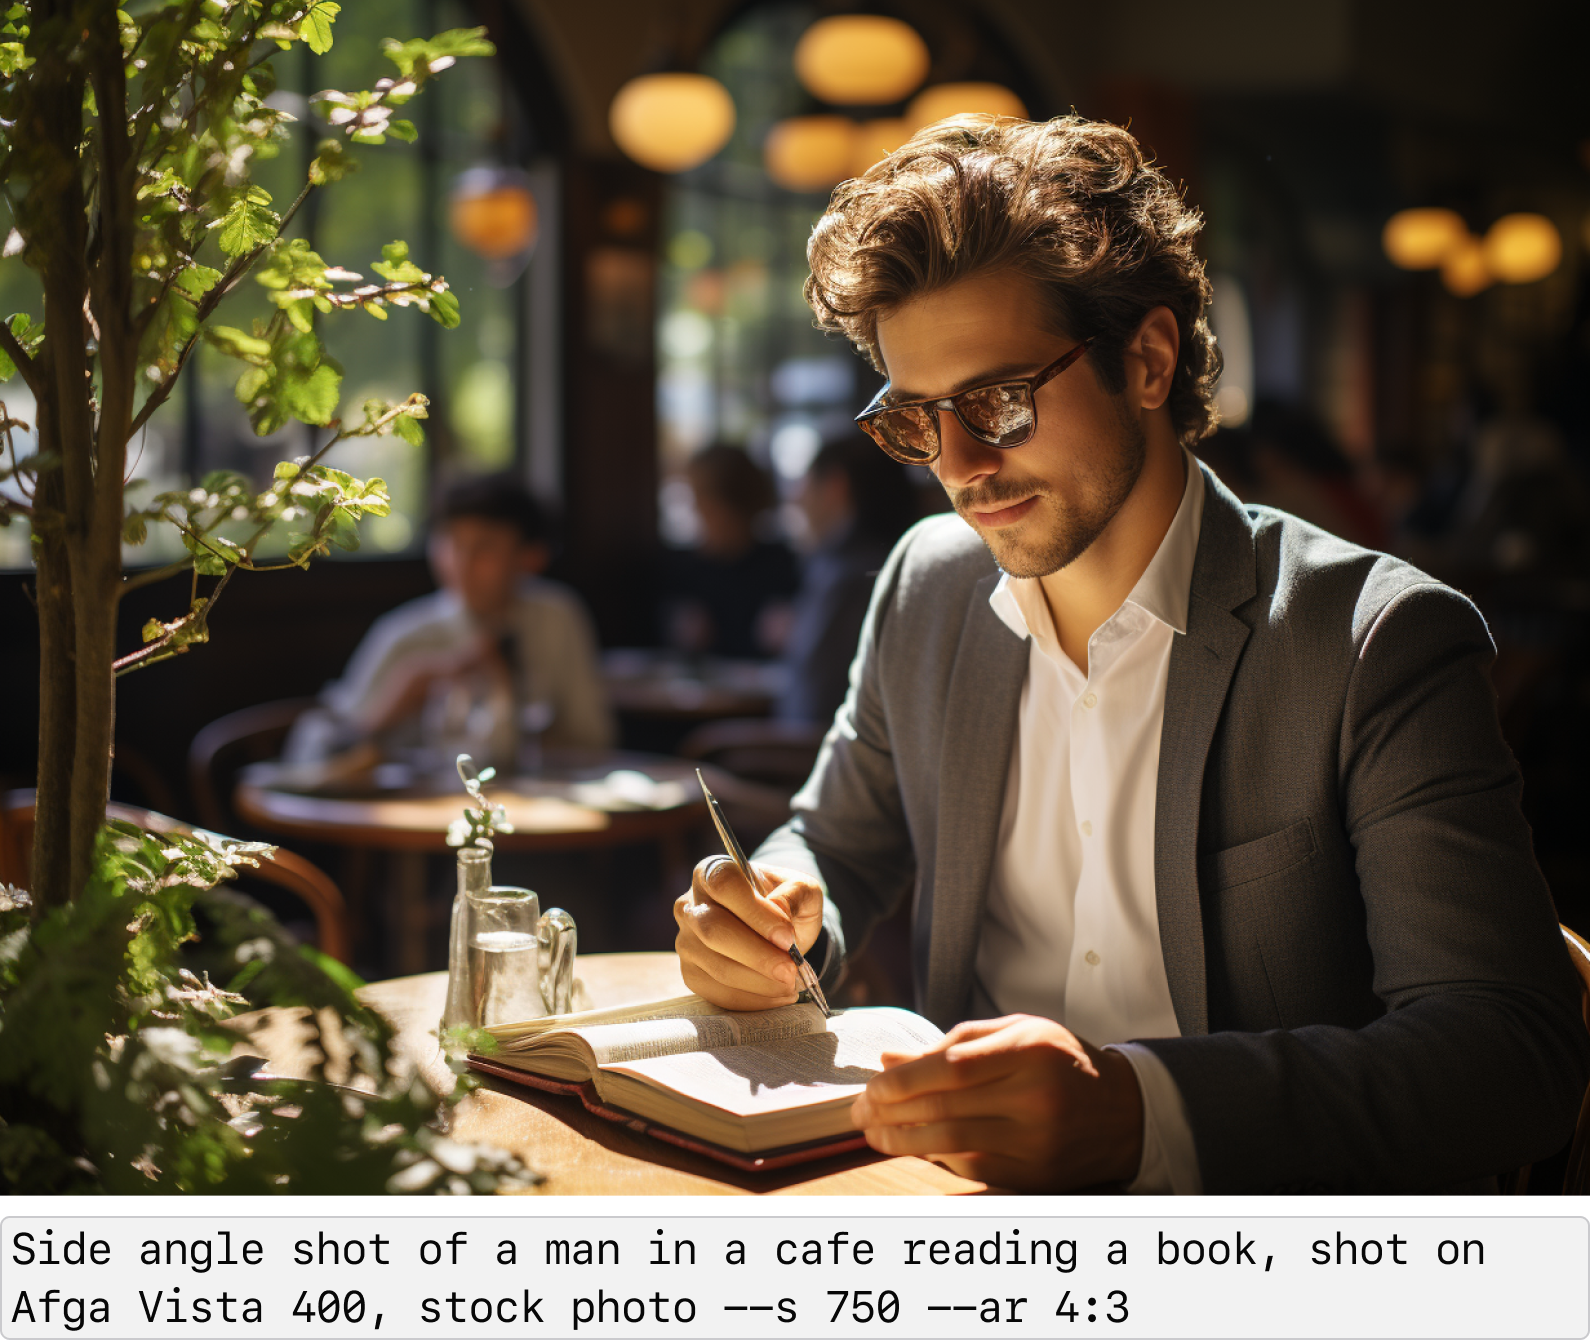 Side angle shot of a man in a cafe reading a book, wearing sunglasses